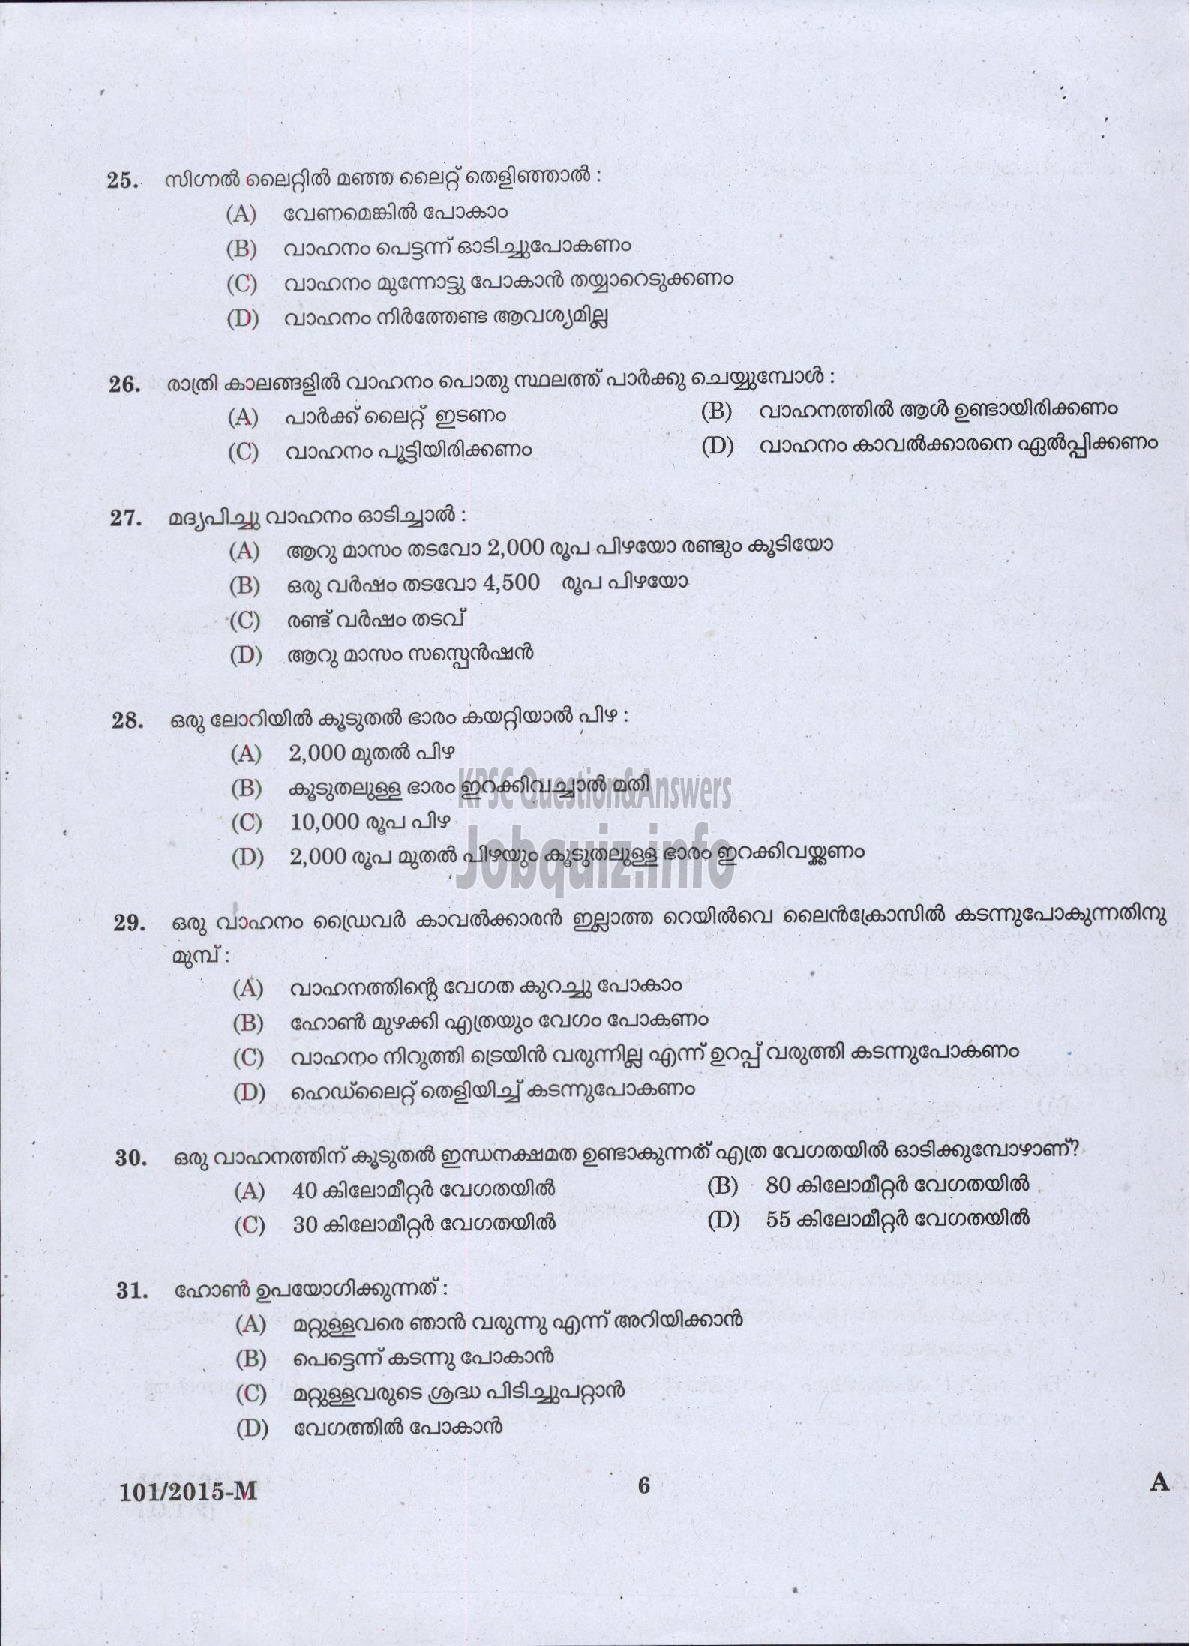 Kerala PSC Question Paper - FIREMAN DRIVER CUM PUMP OPERATOR TRAINEE FIRE AND RESCUE SERVICES ( Malayalam ) -4